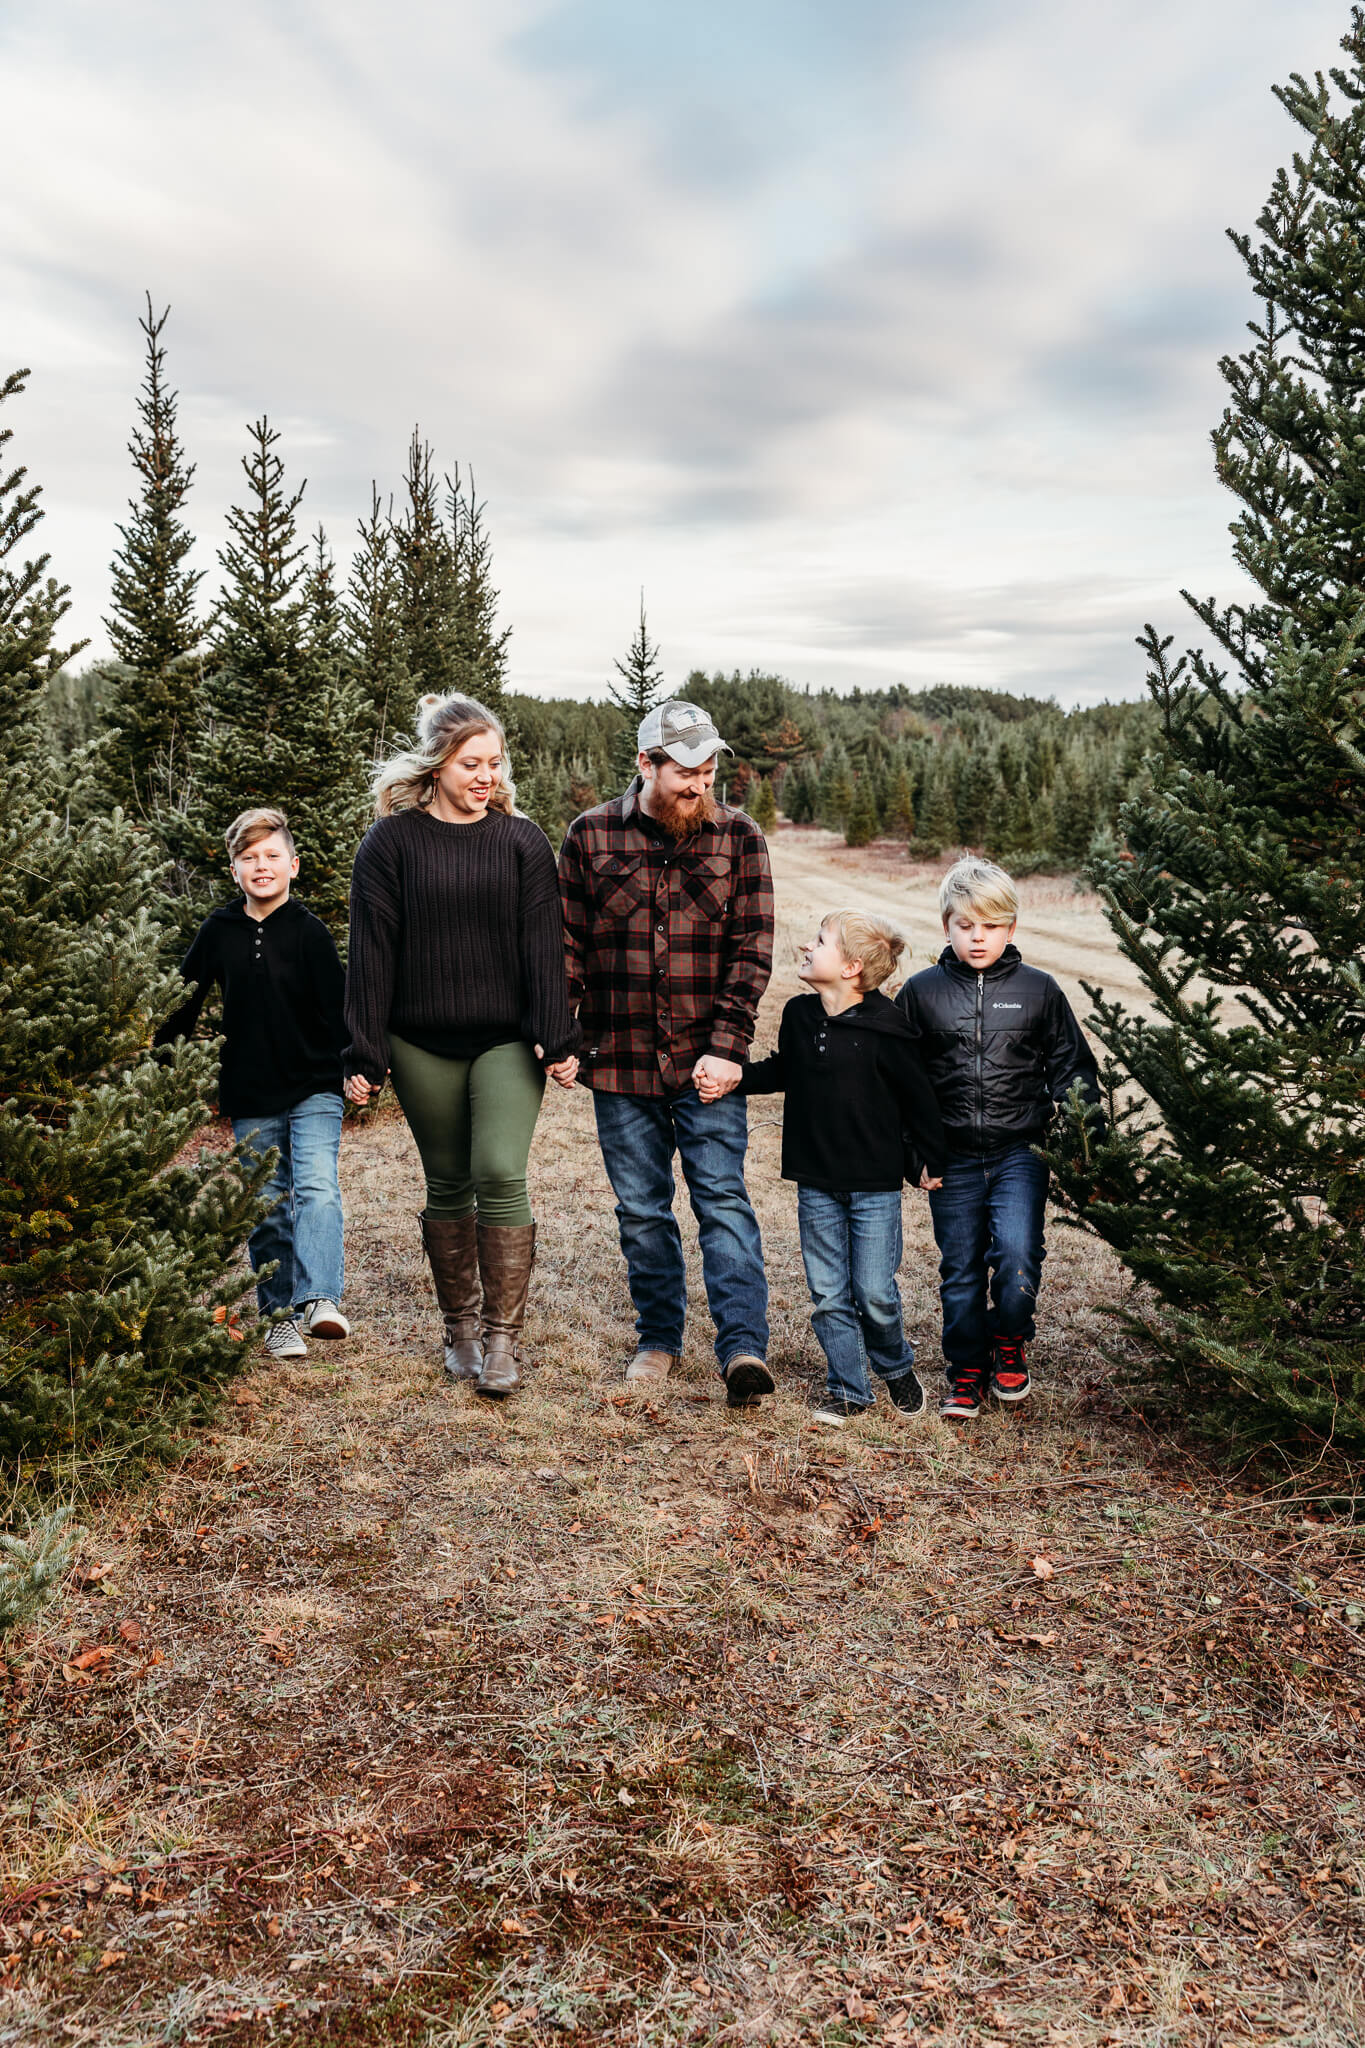 cute family walking together and laughing in the pine trees by Ashley Kalbus Photography